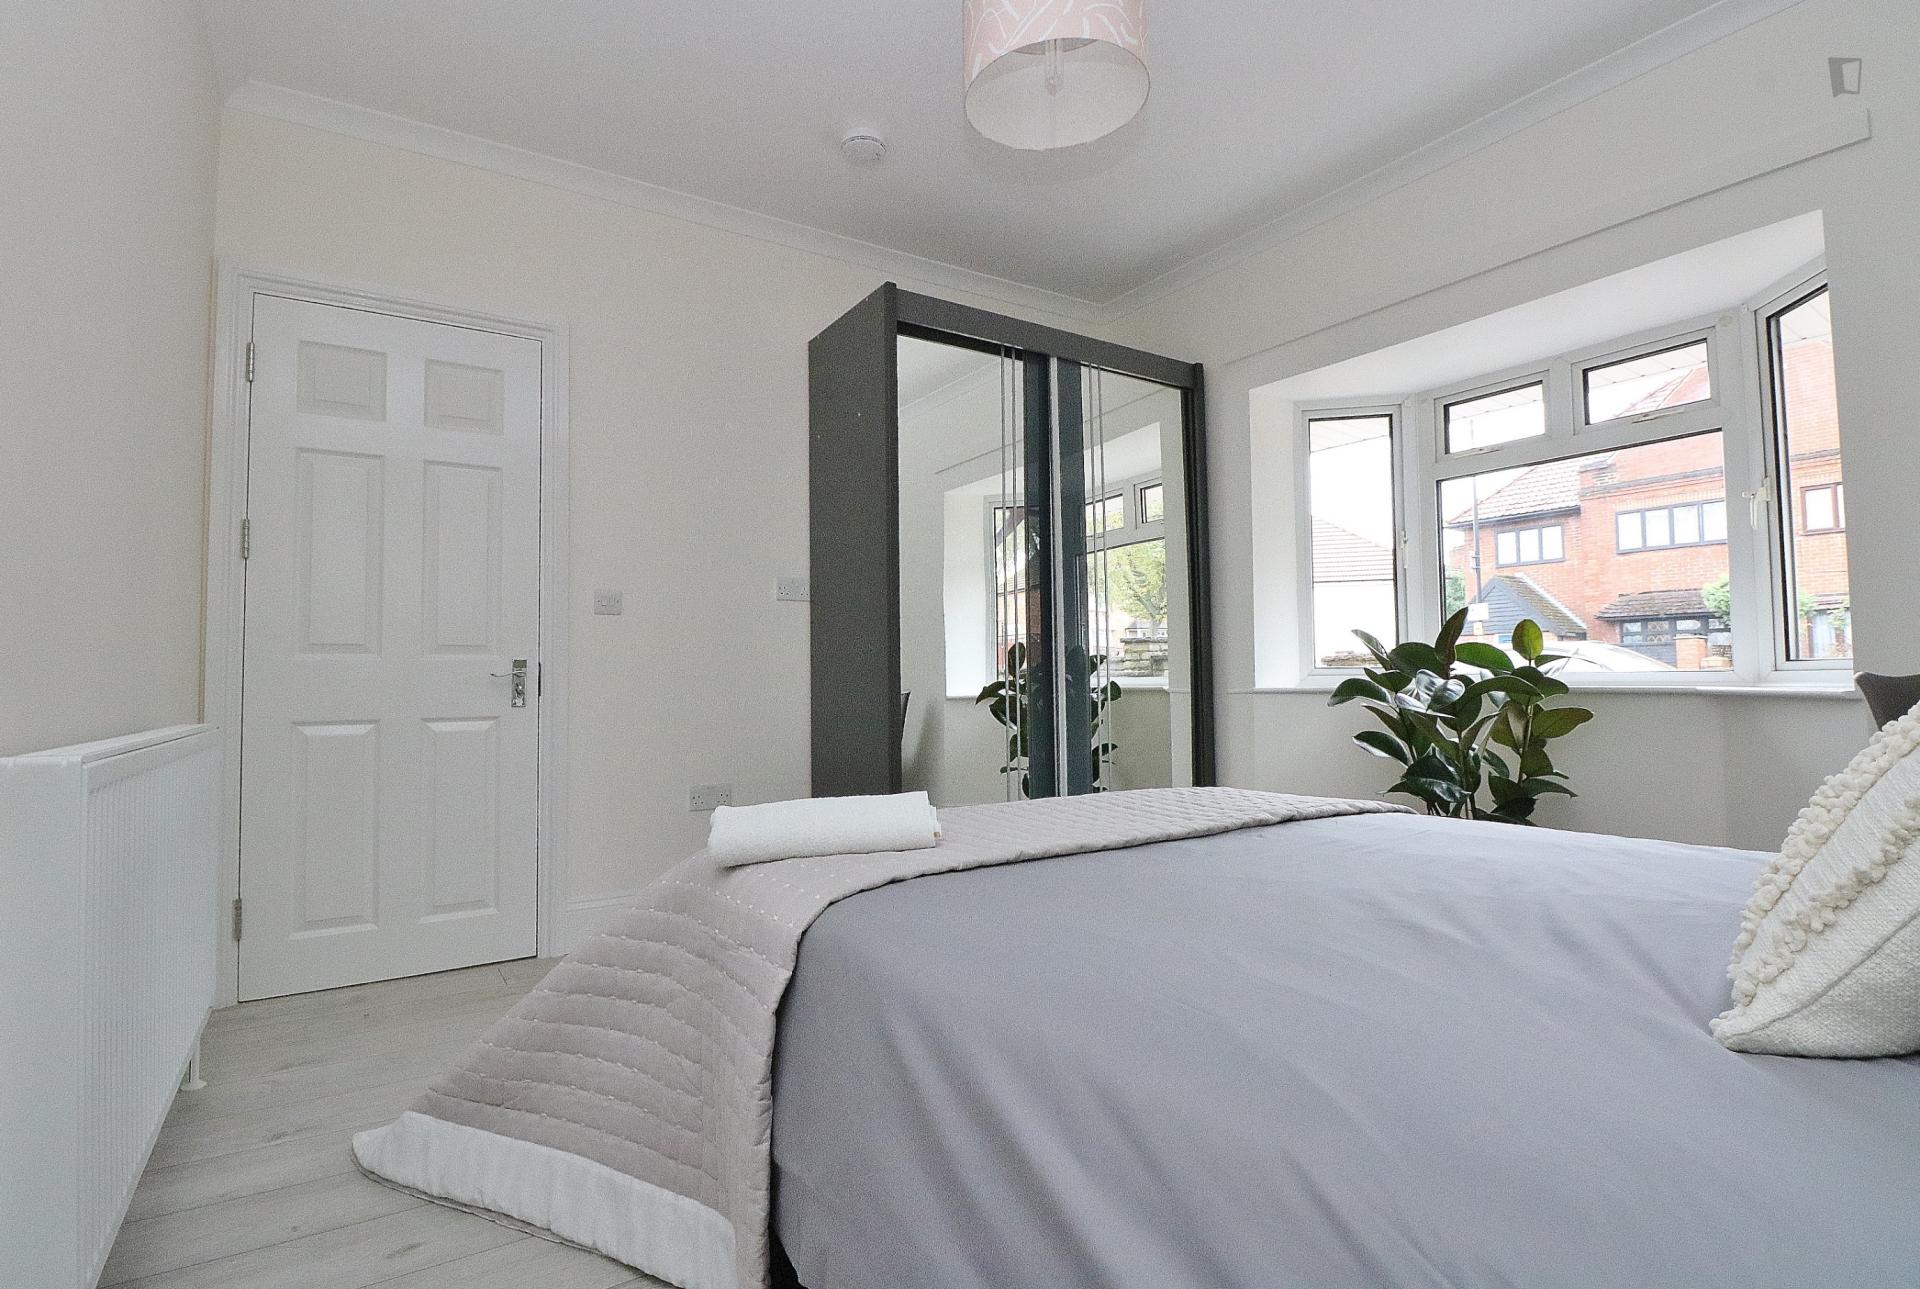 Fairway - Modern bedroom in London for expats